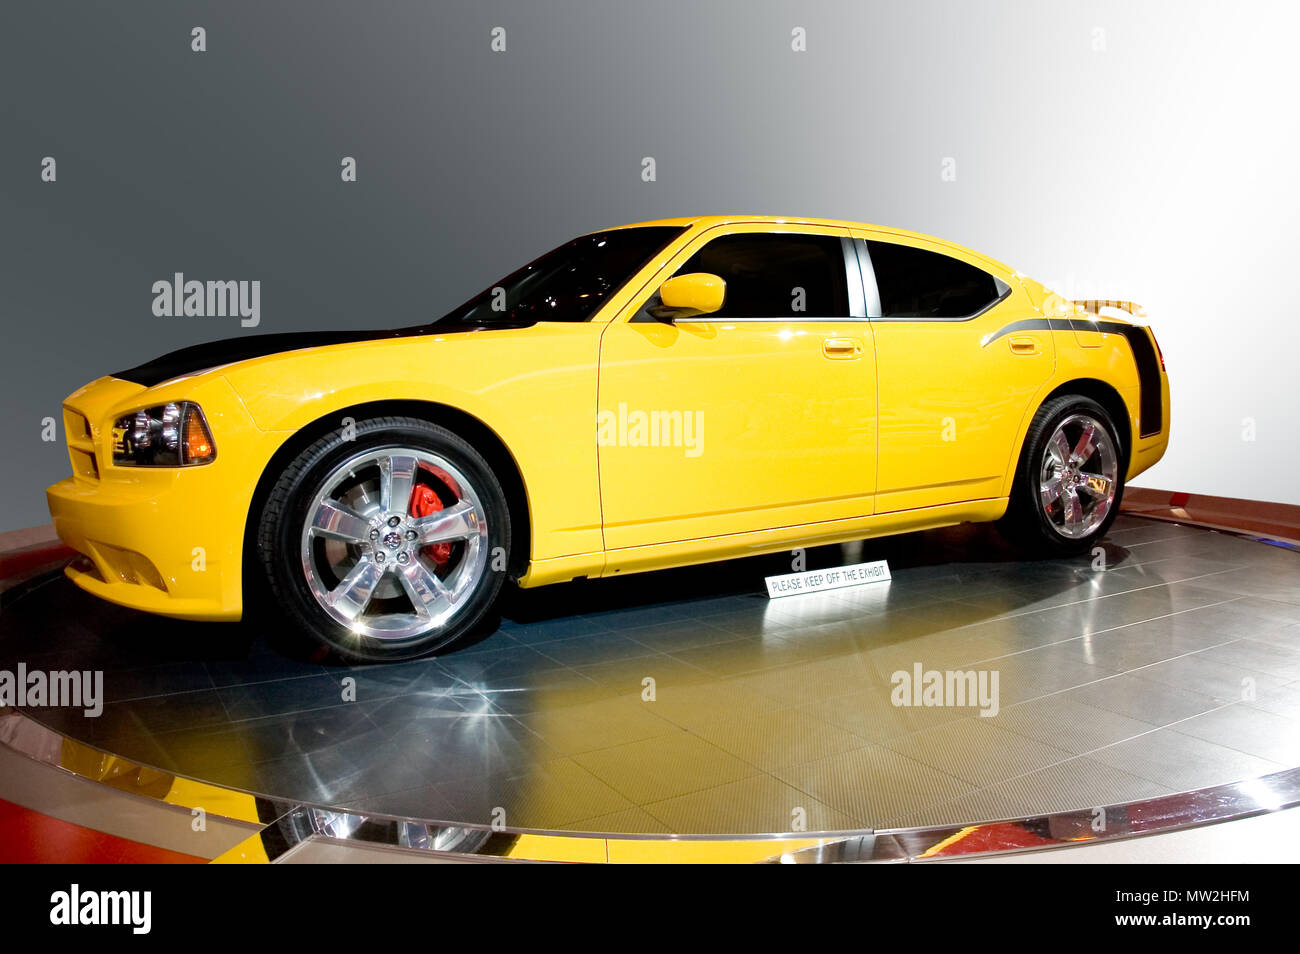 A new retro style Dodge Charger Super Bee. More car photos in my gallery  Stock Photo - Alamy